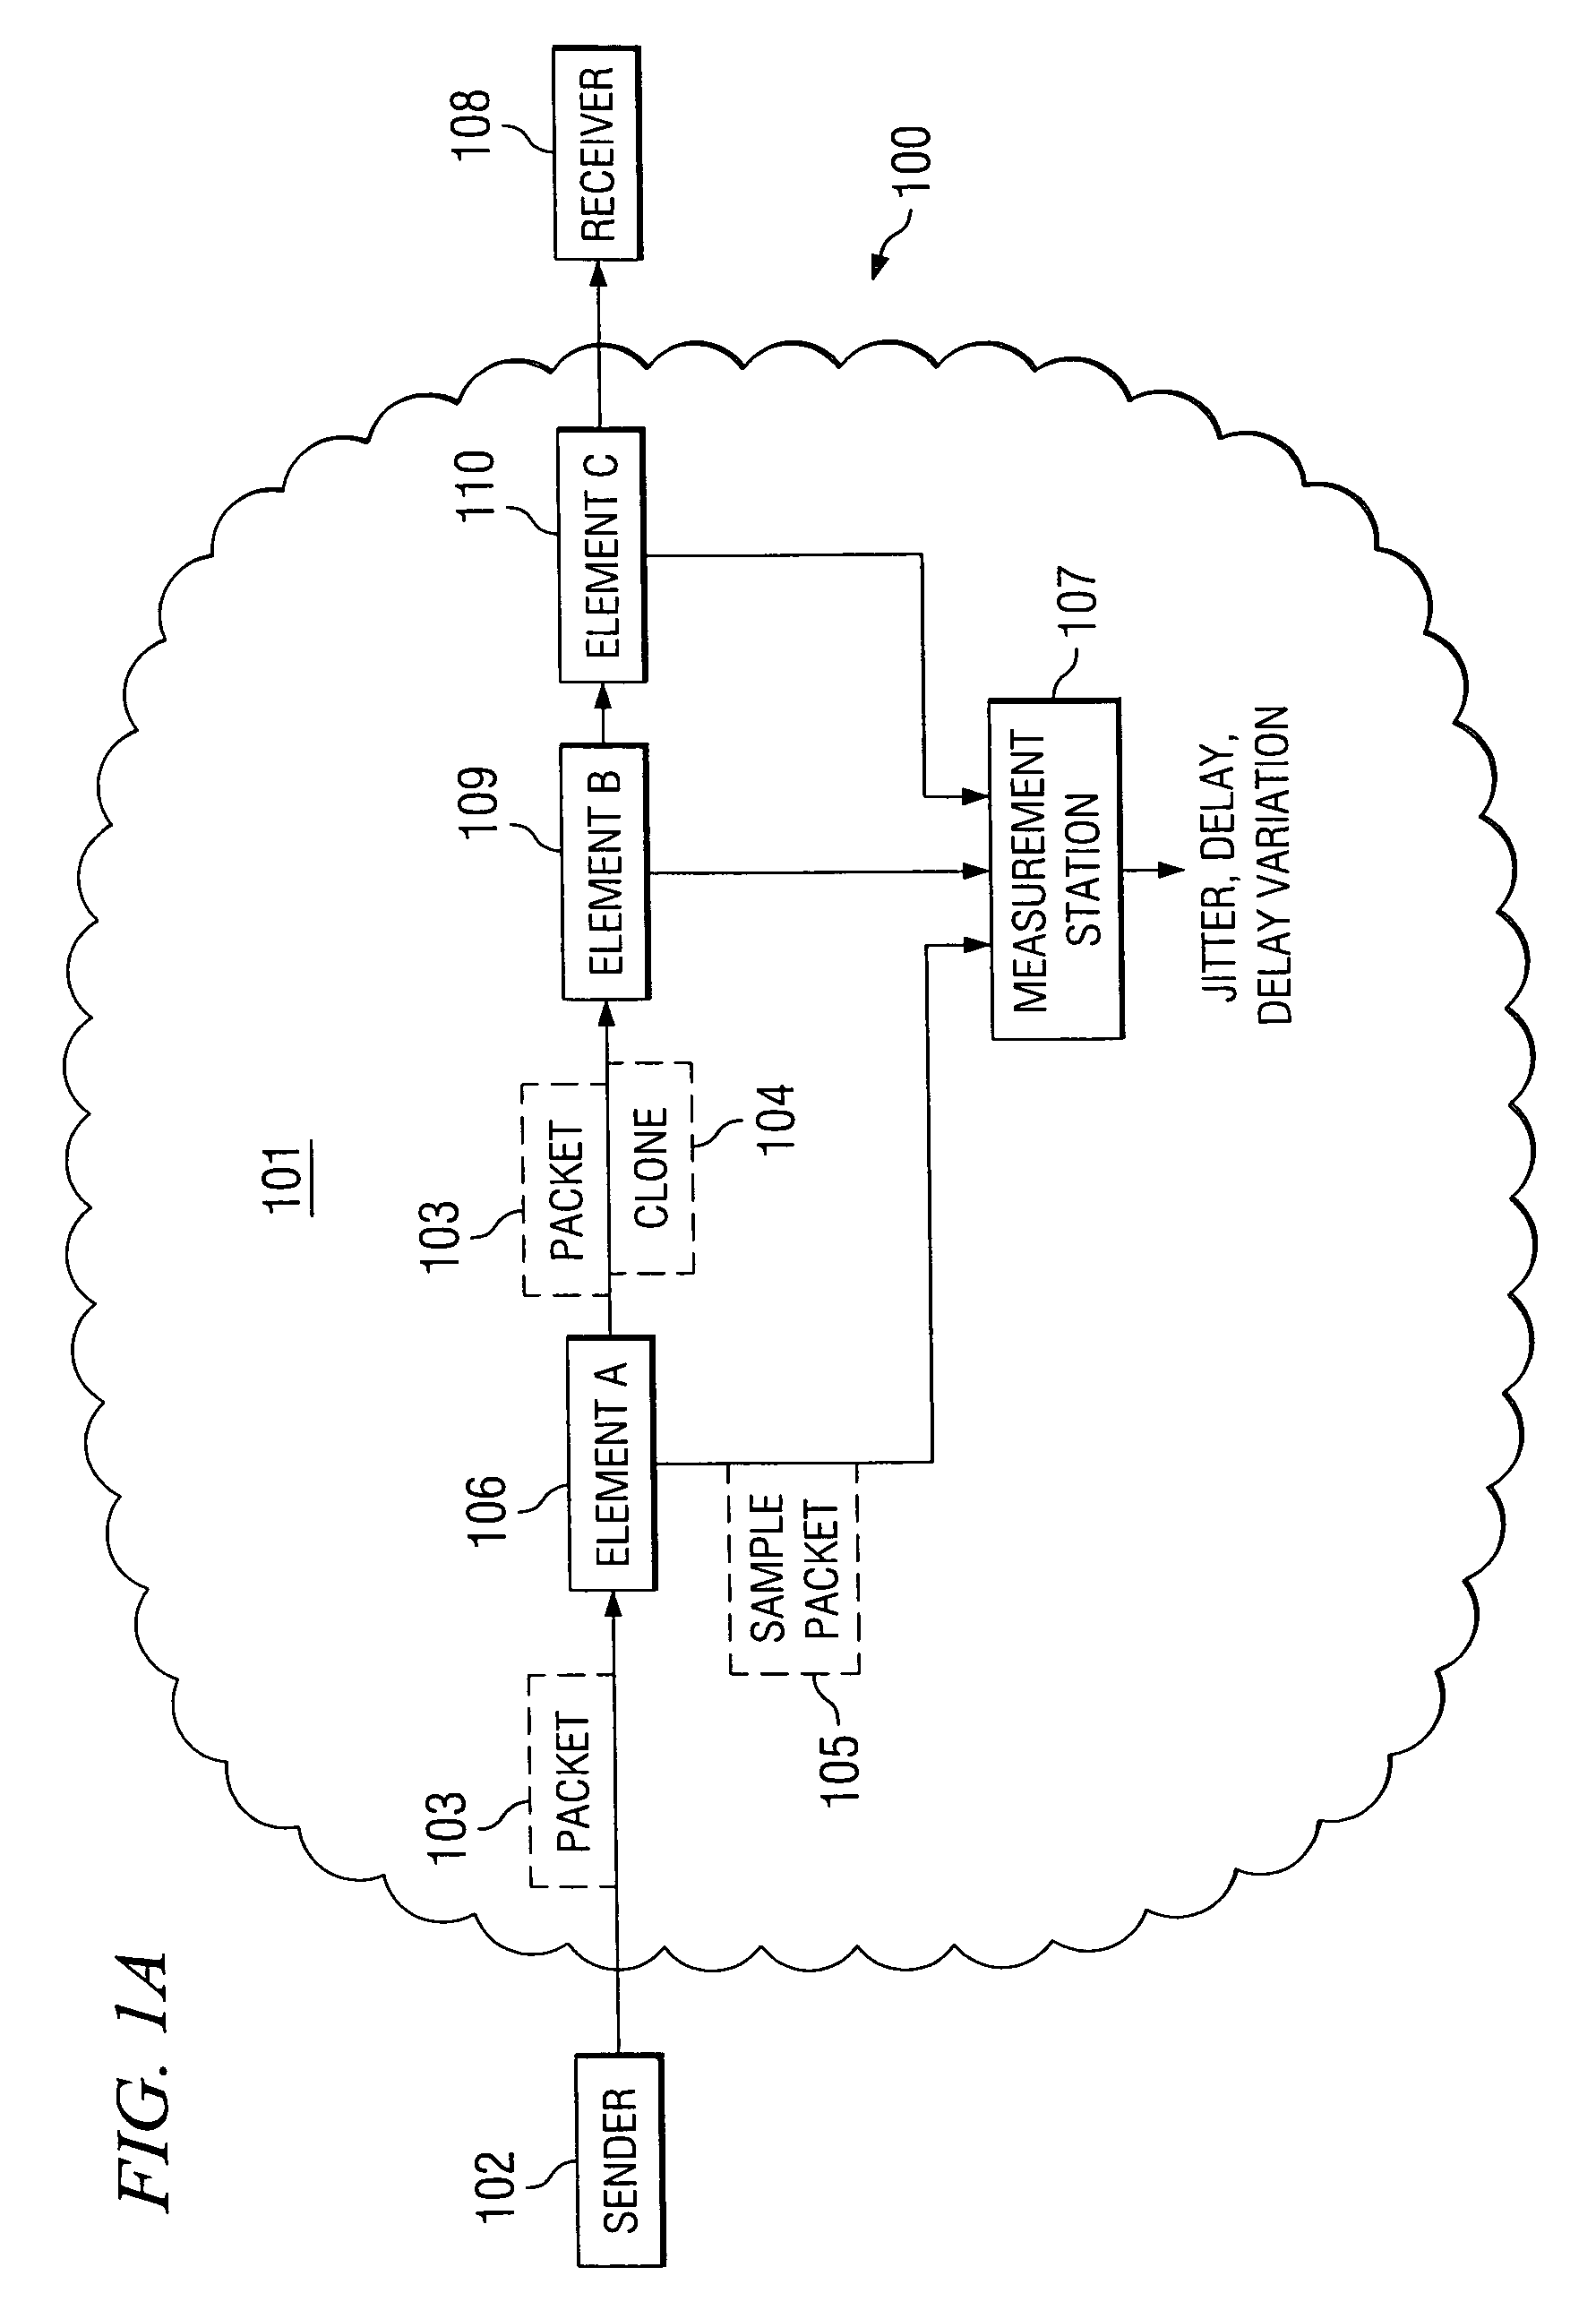 System and method for measuring network performance using real network traffic